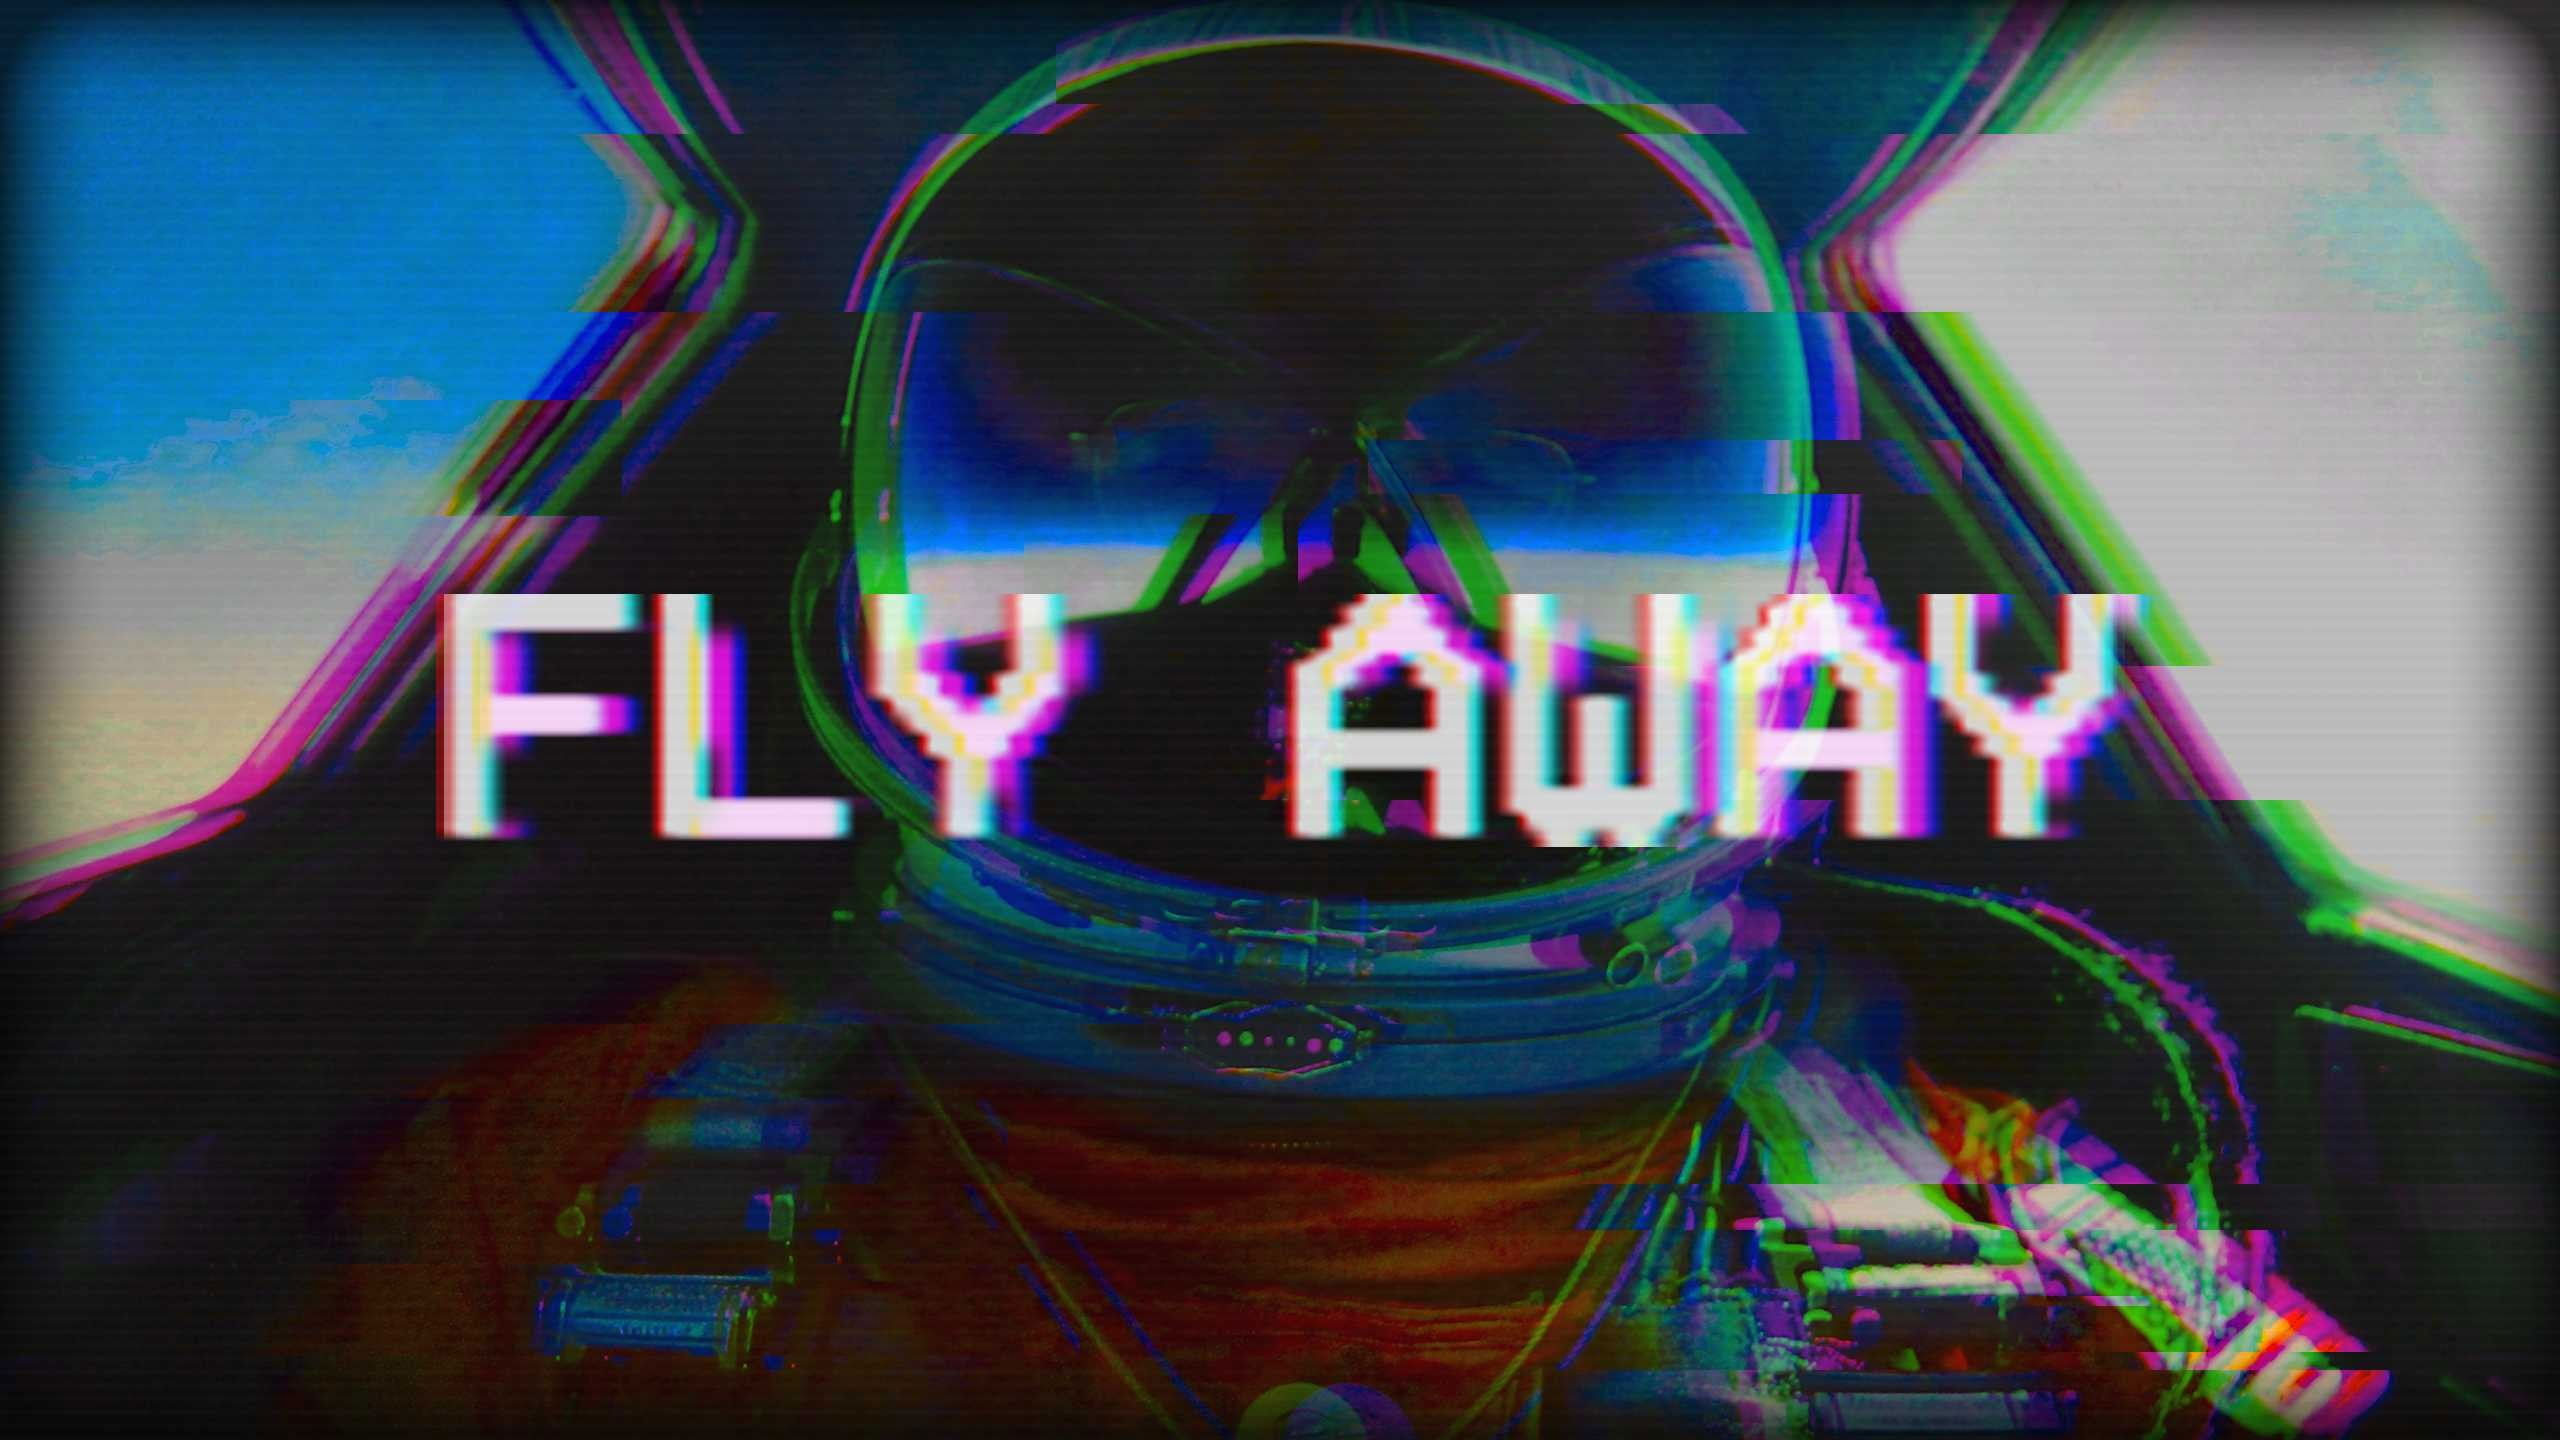 Orange and gray wallpaper space helmet with text overlay, vaporwave, glitch art